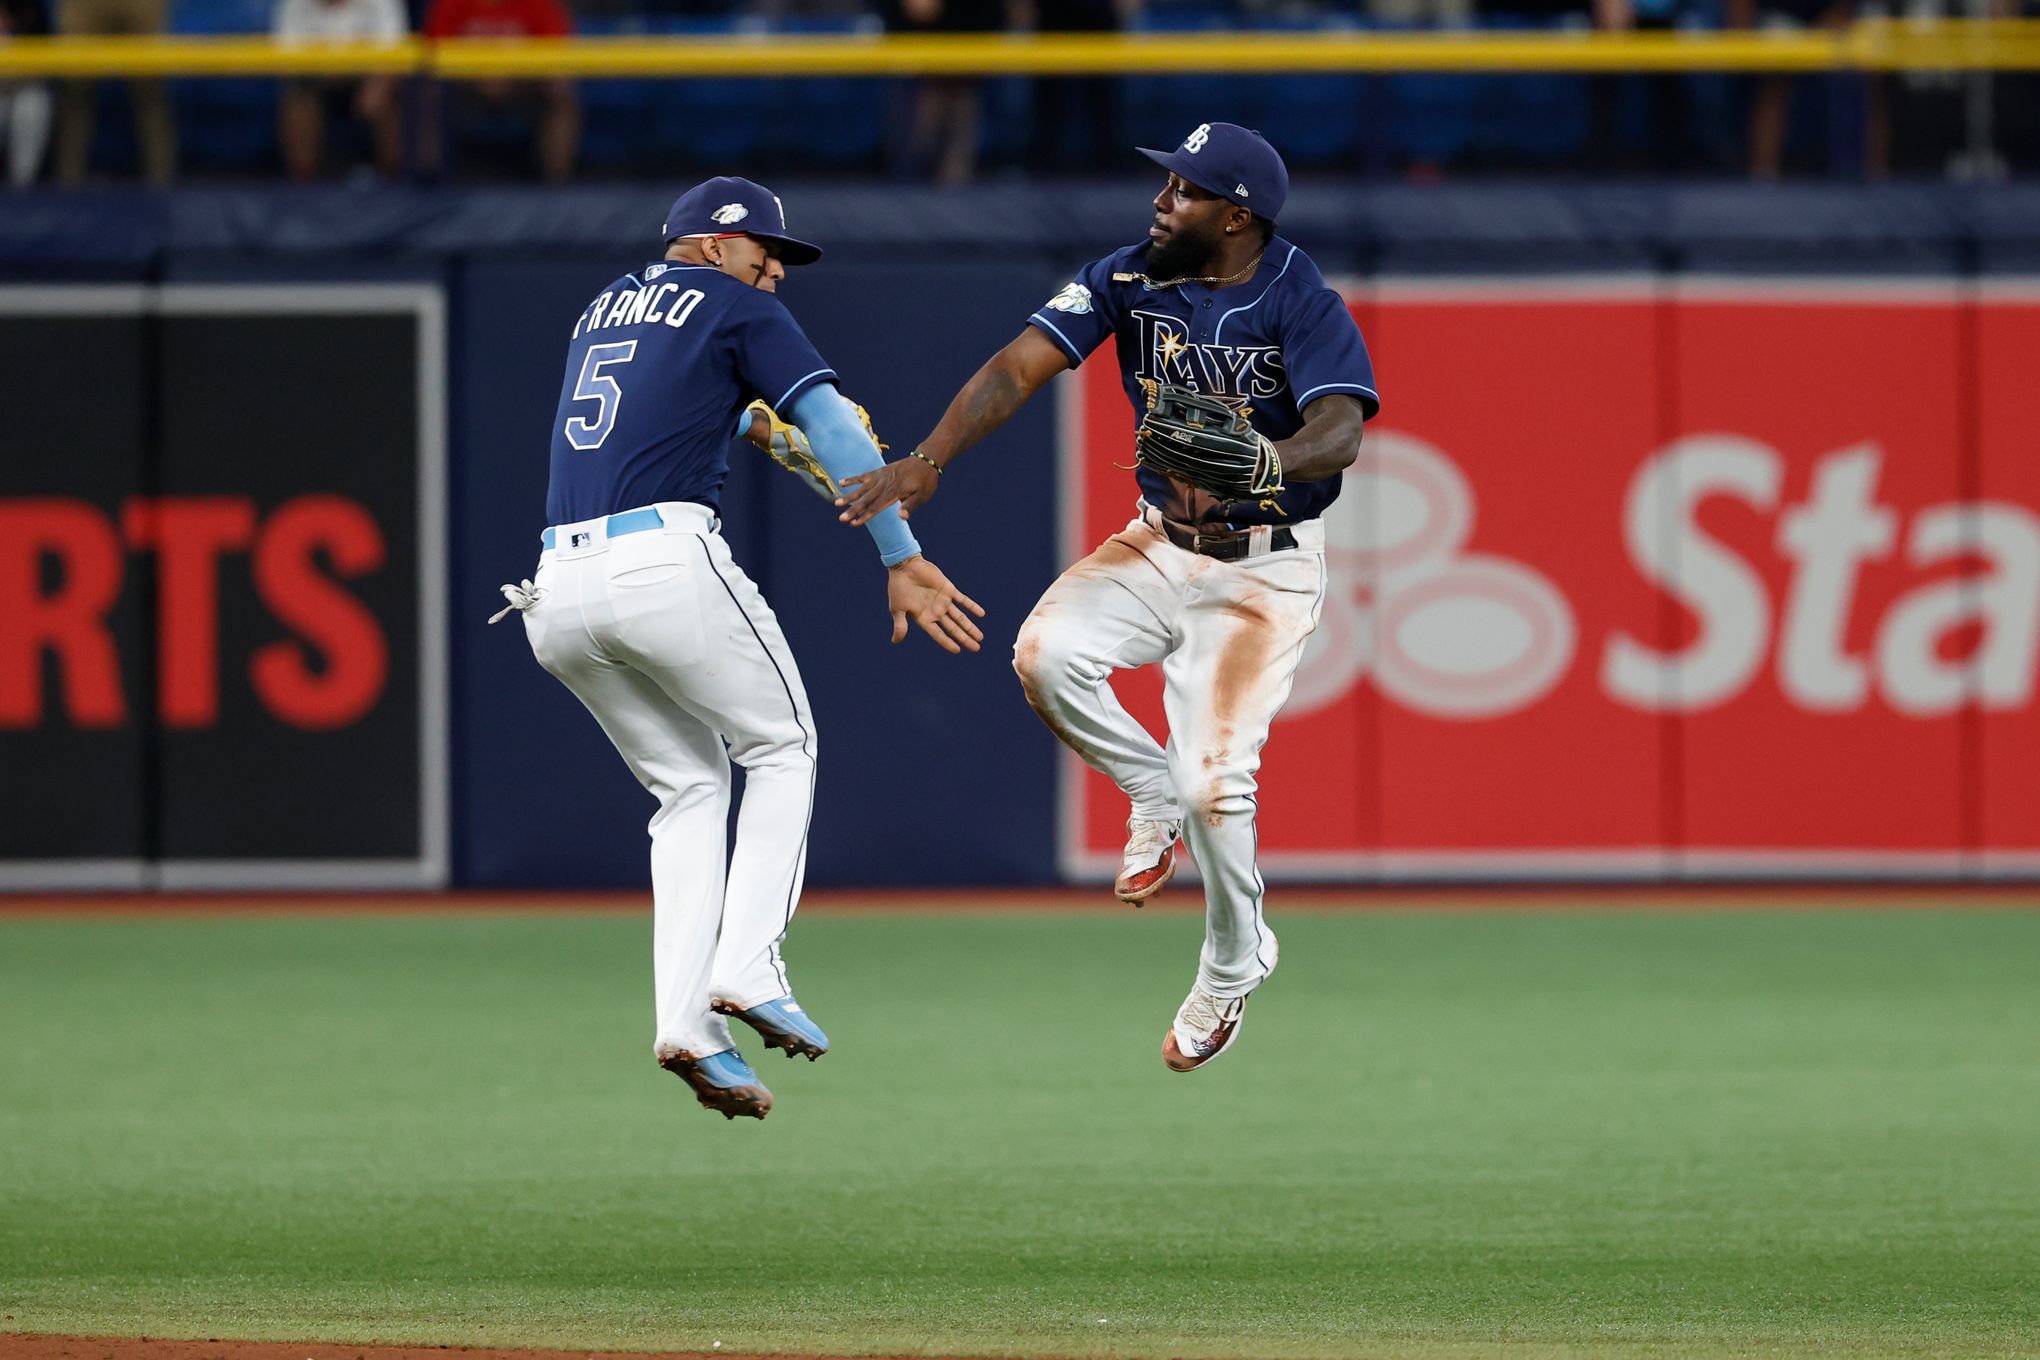 Rays win modern record 14th straight at home to start season